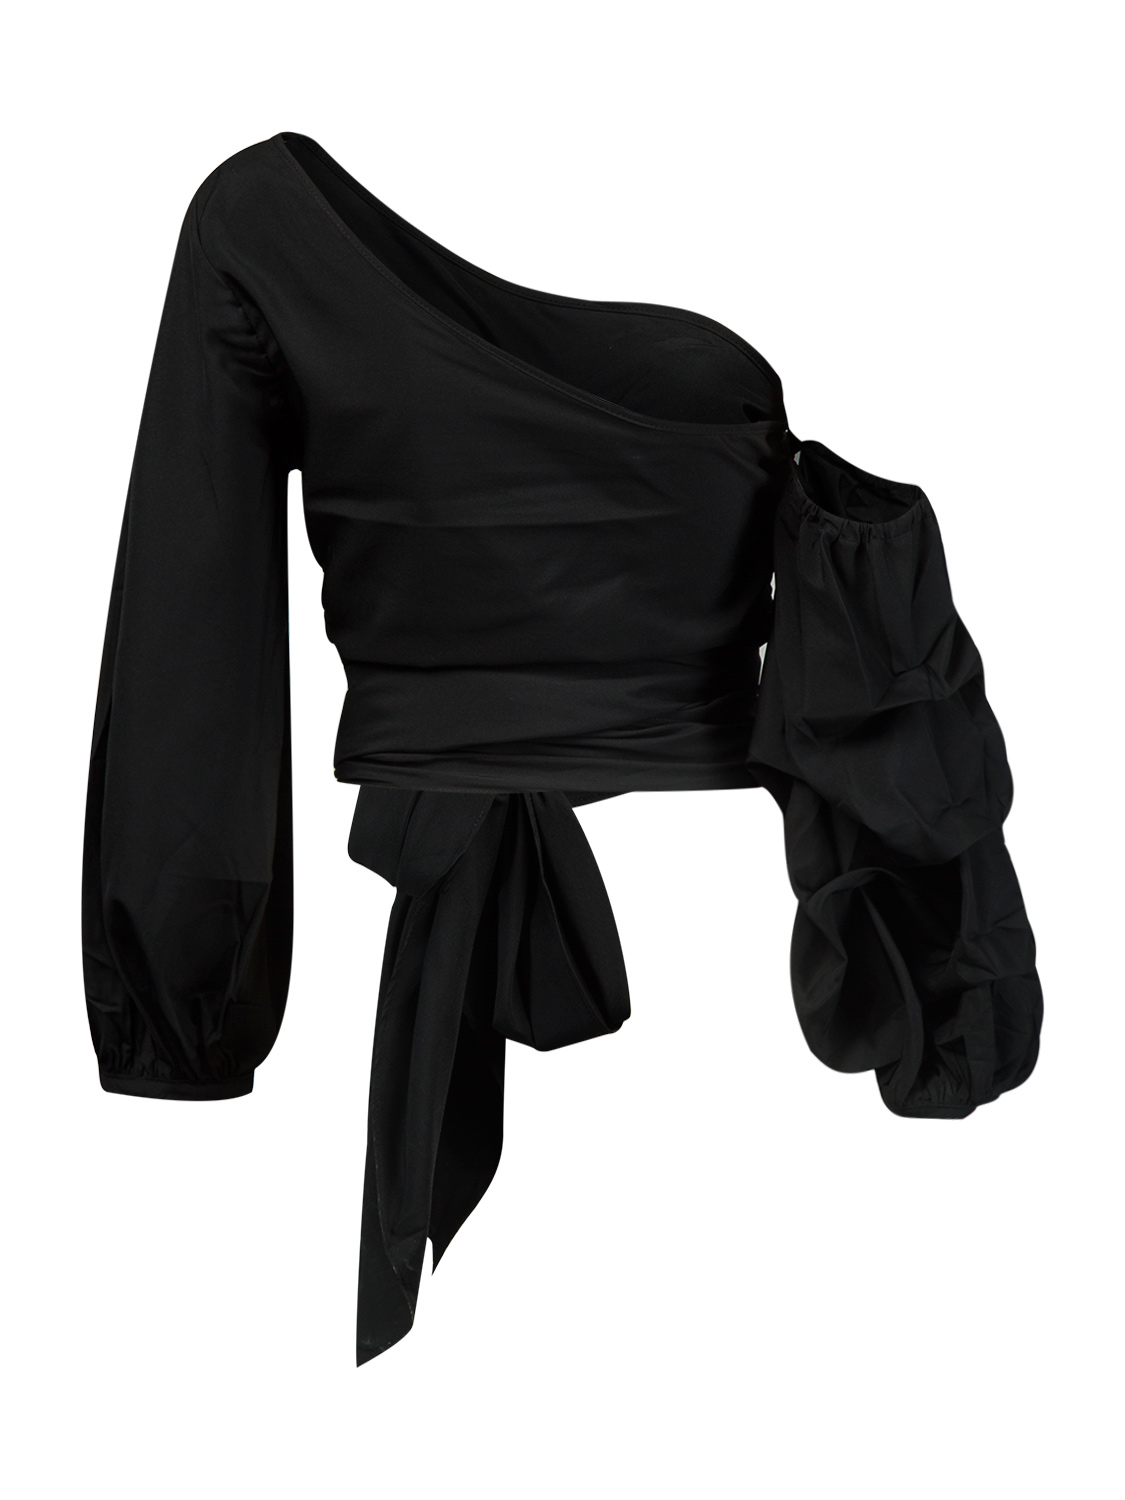 Black One Shoulder Tie Strap Ruched Puff Sleeve Top | Choies